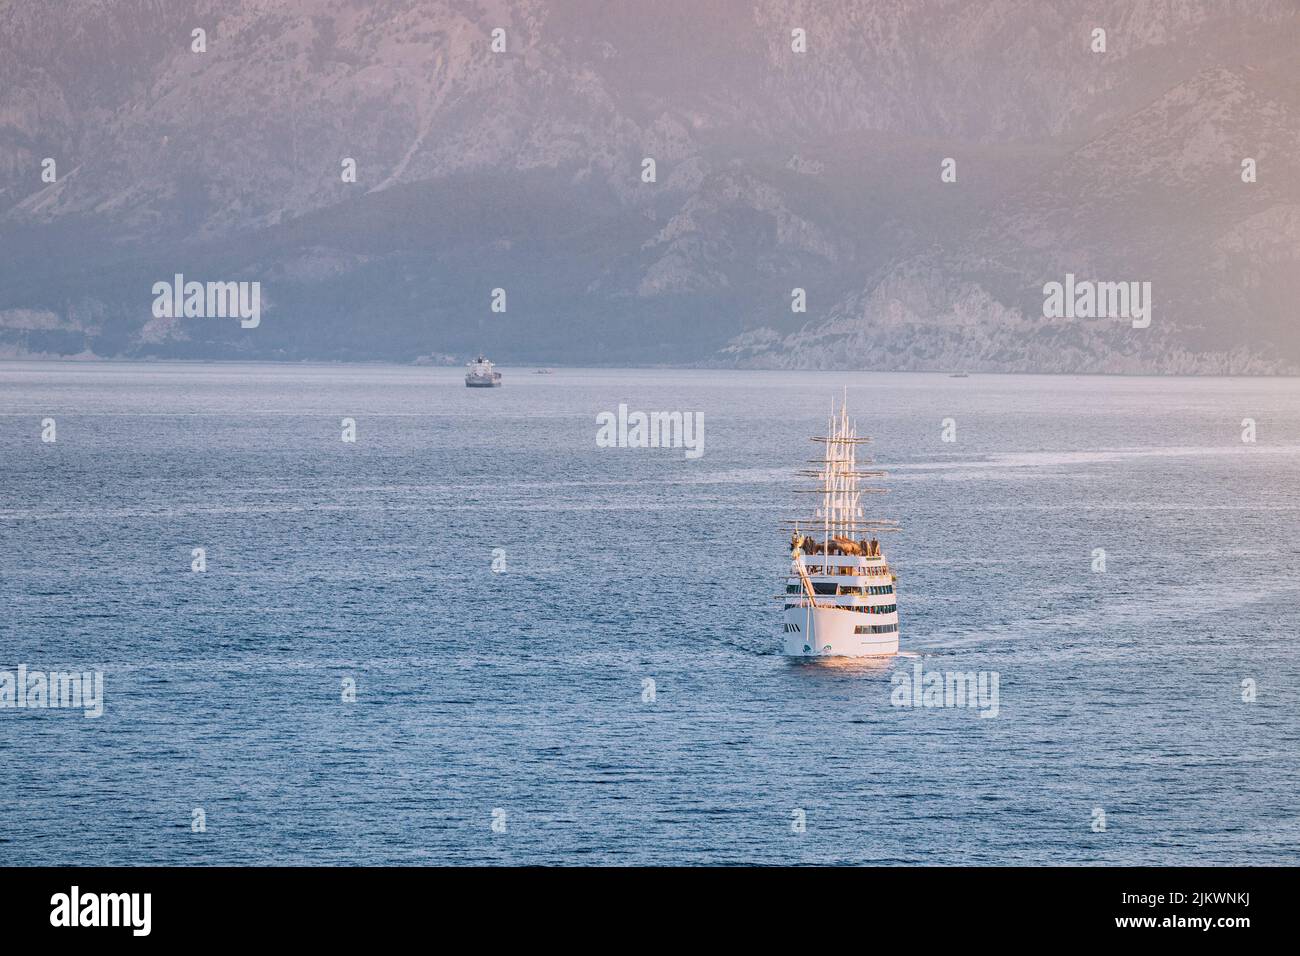 The excursion luxury ship frigate sails on the water surface of the Mediterranean Sea against the backdrop of high mountains and sunset. Stock Photo